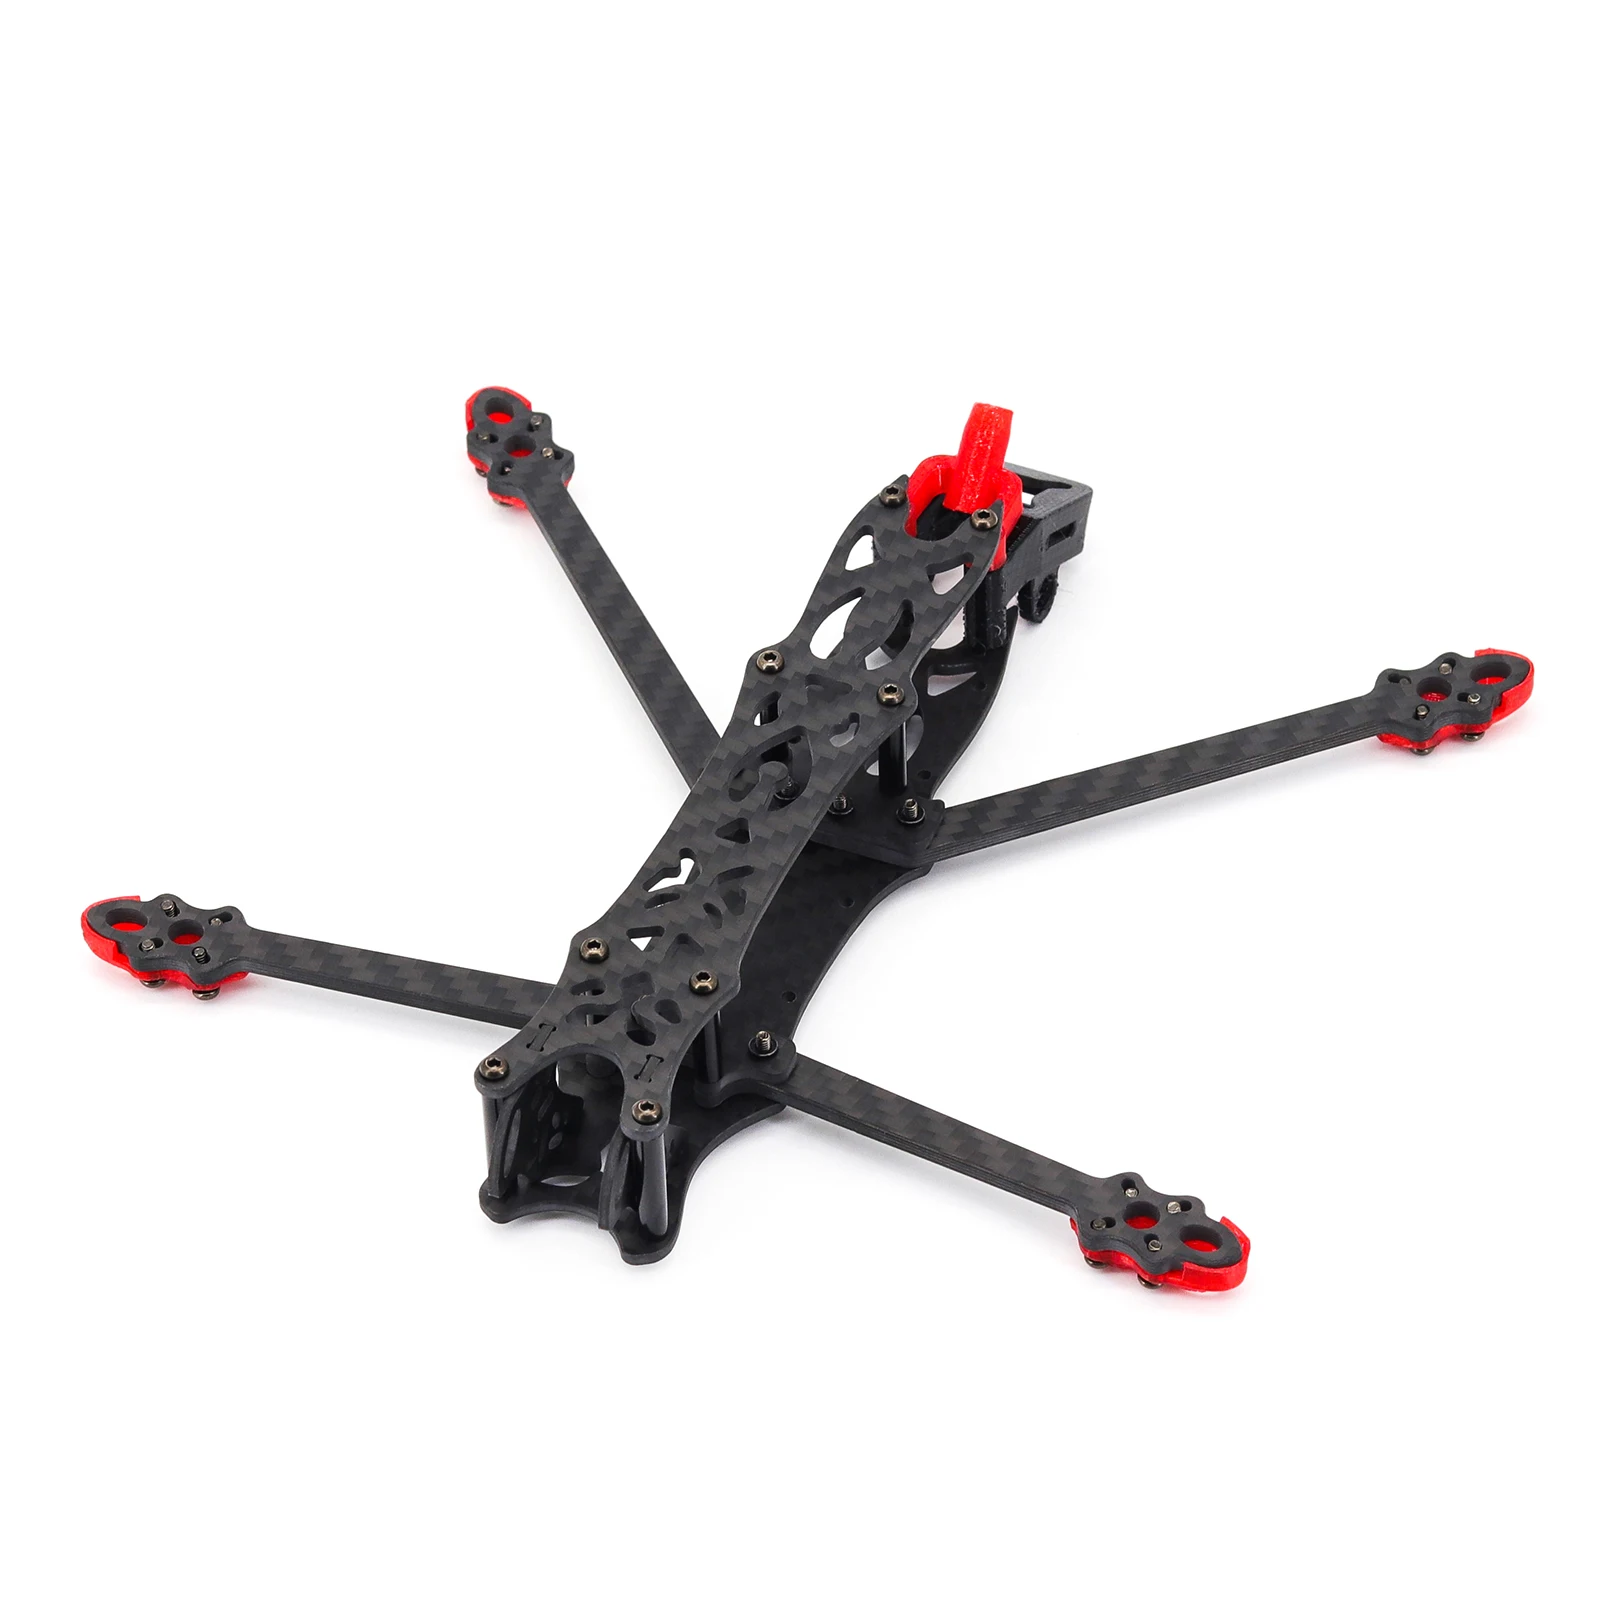 

TCMMRC NEW 4-Inch Night Phoenix 4 Drone Frame Kit for FPV Quadcopter Drones Accessories High Quality with 3D Print